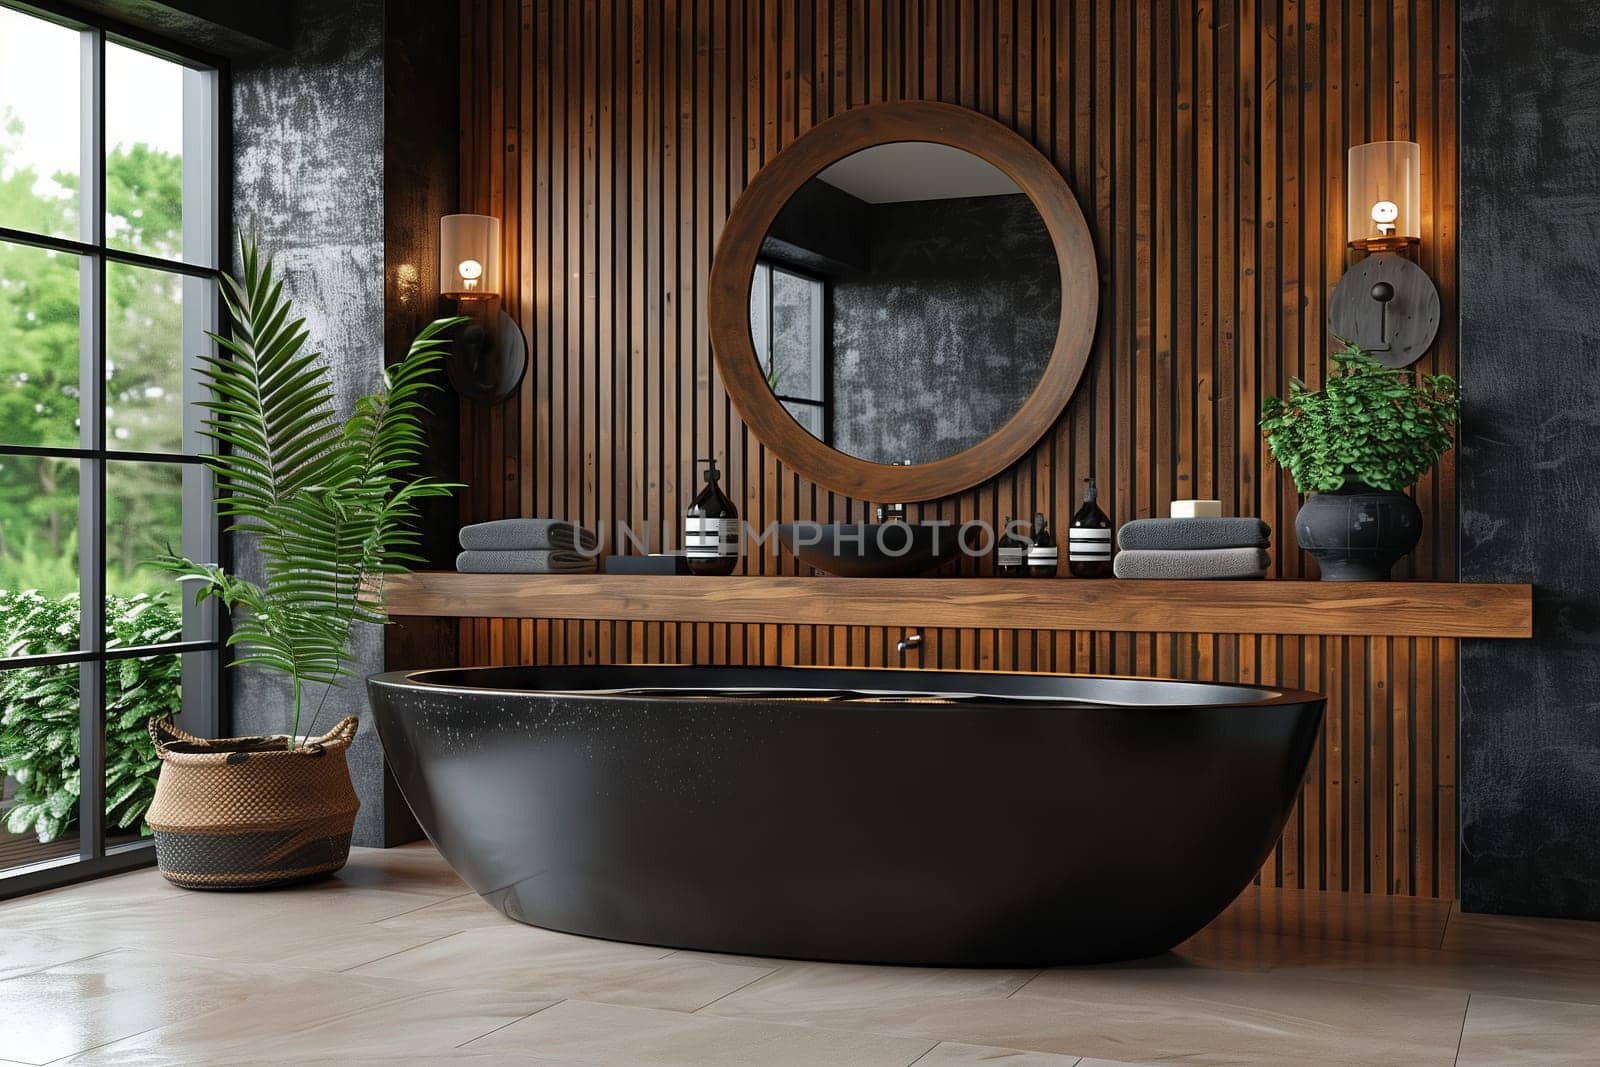 A modern bathroom with a black tub, sink, and mirror. The hardwood floor complements the fixtures. A plant in a flowerpot adds a touch of nature